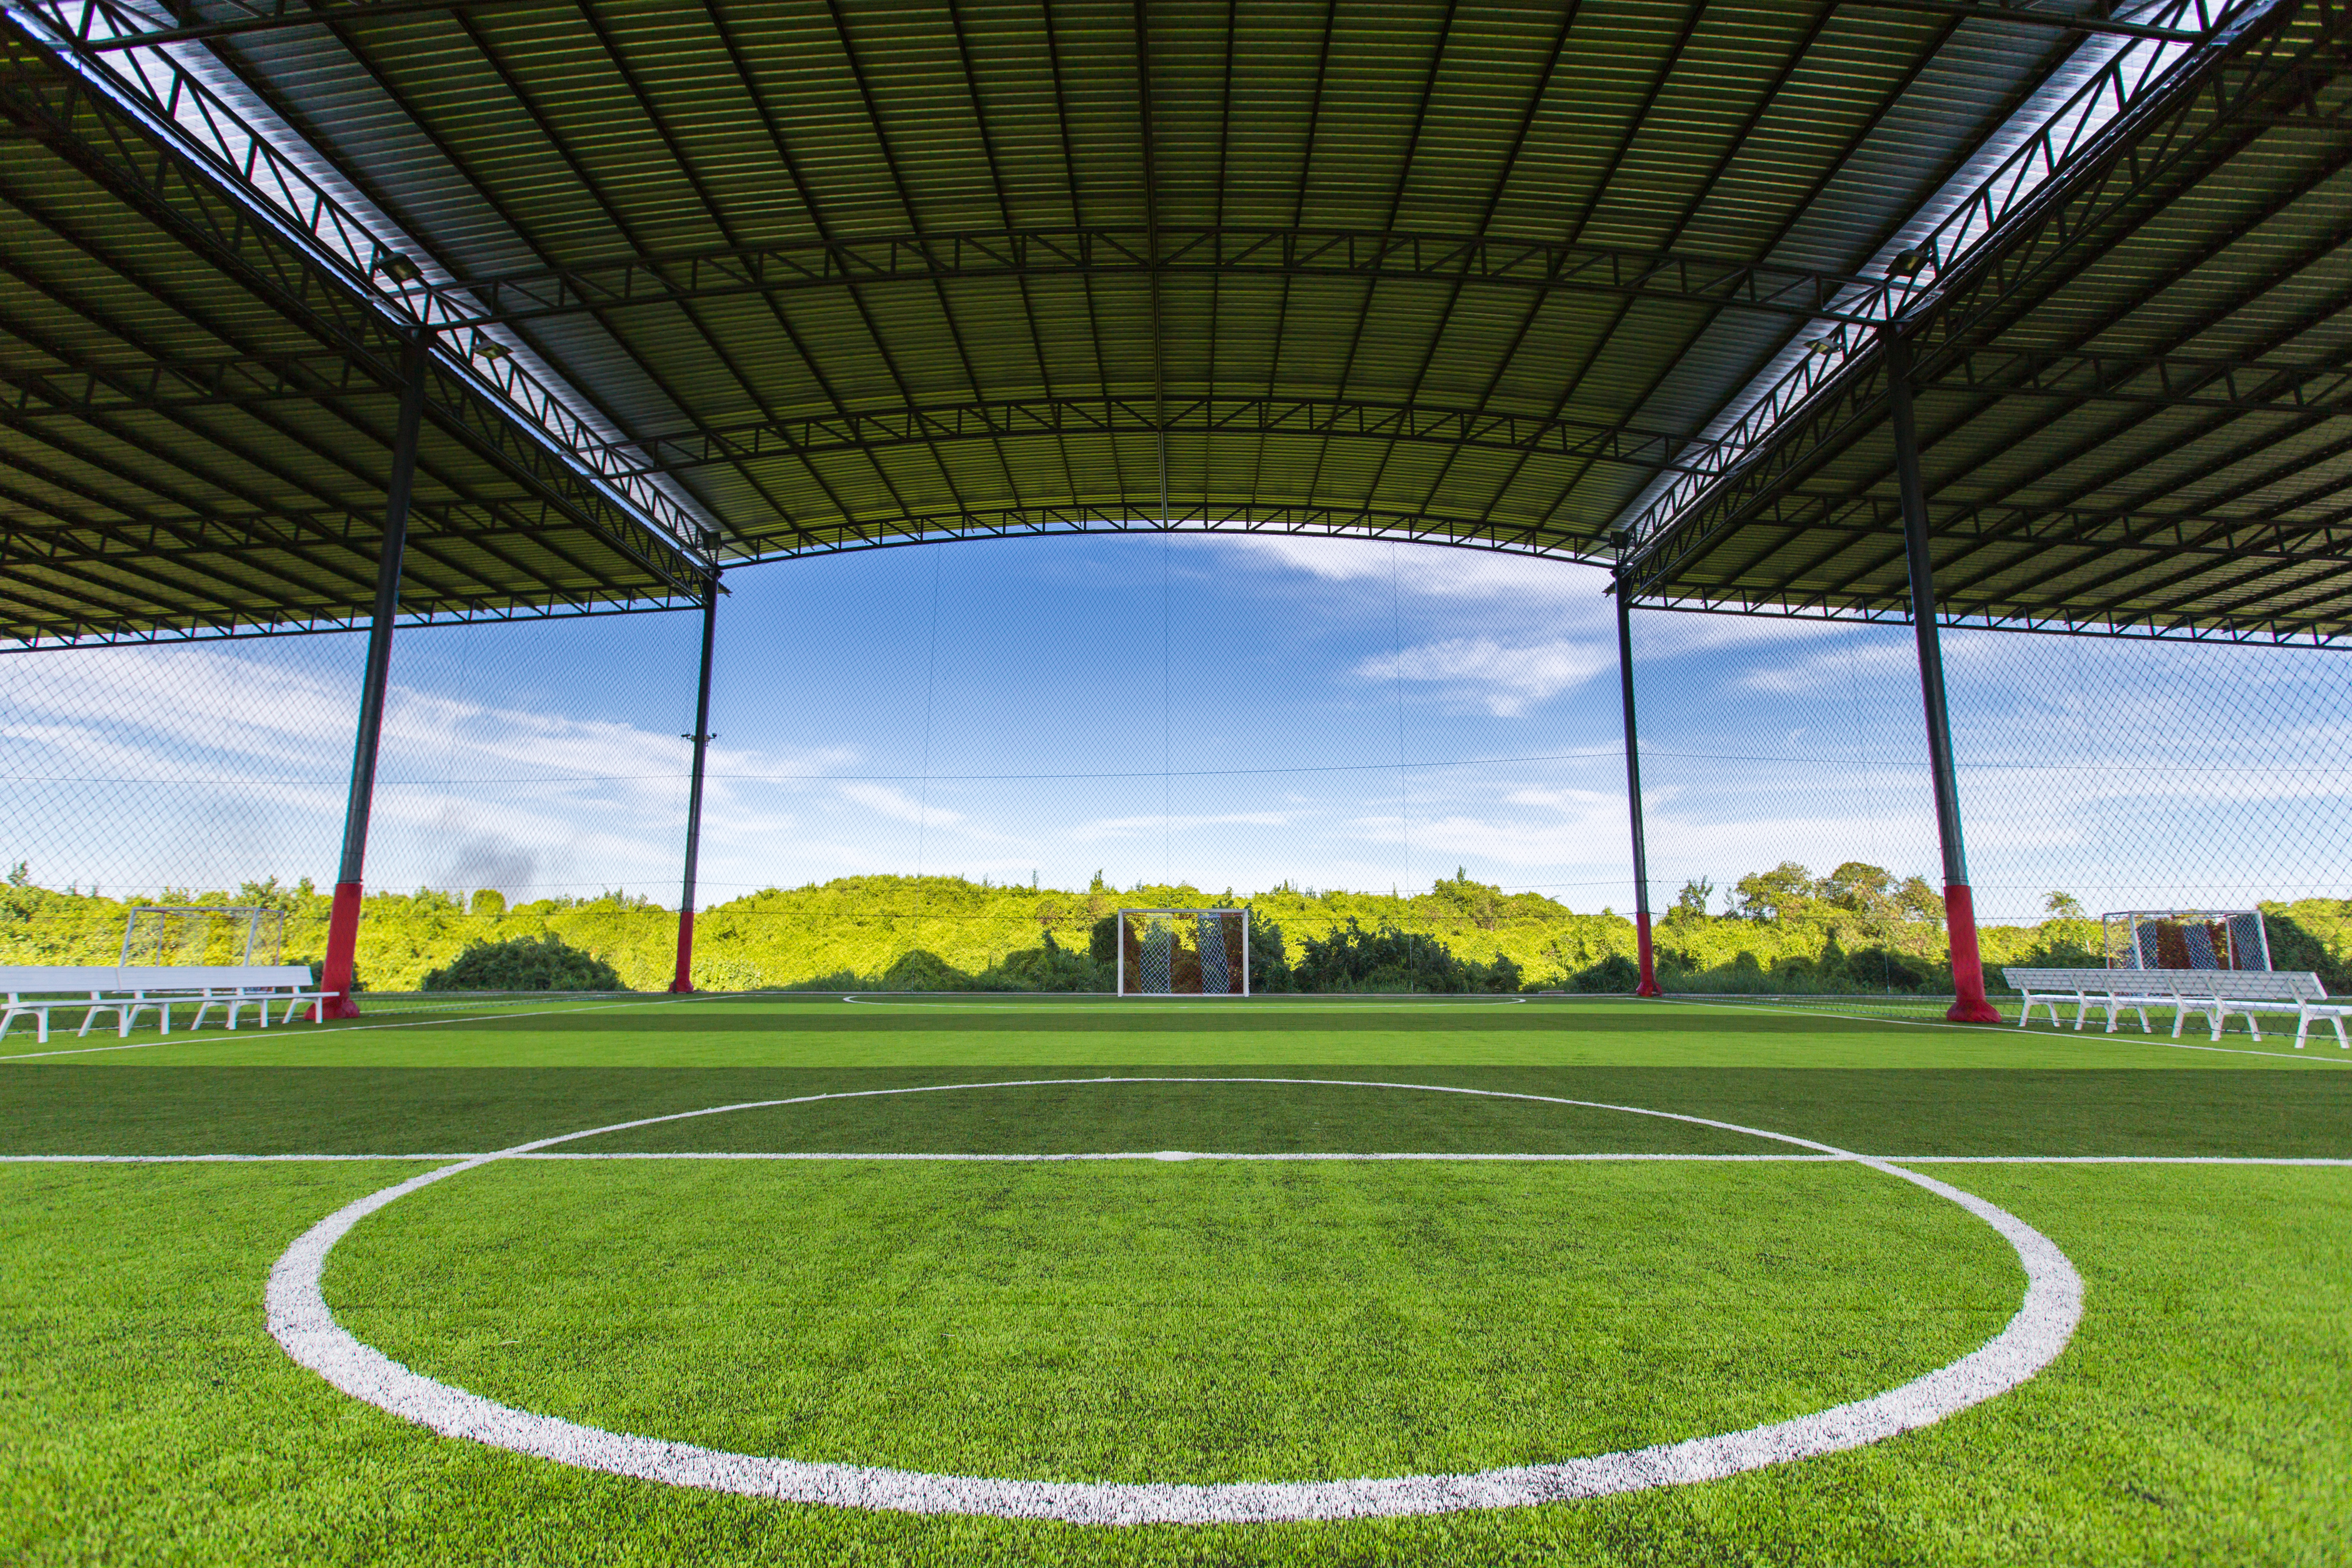 Advantages of Artificial Turf Used for Indoor Football Fields